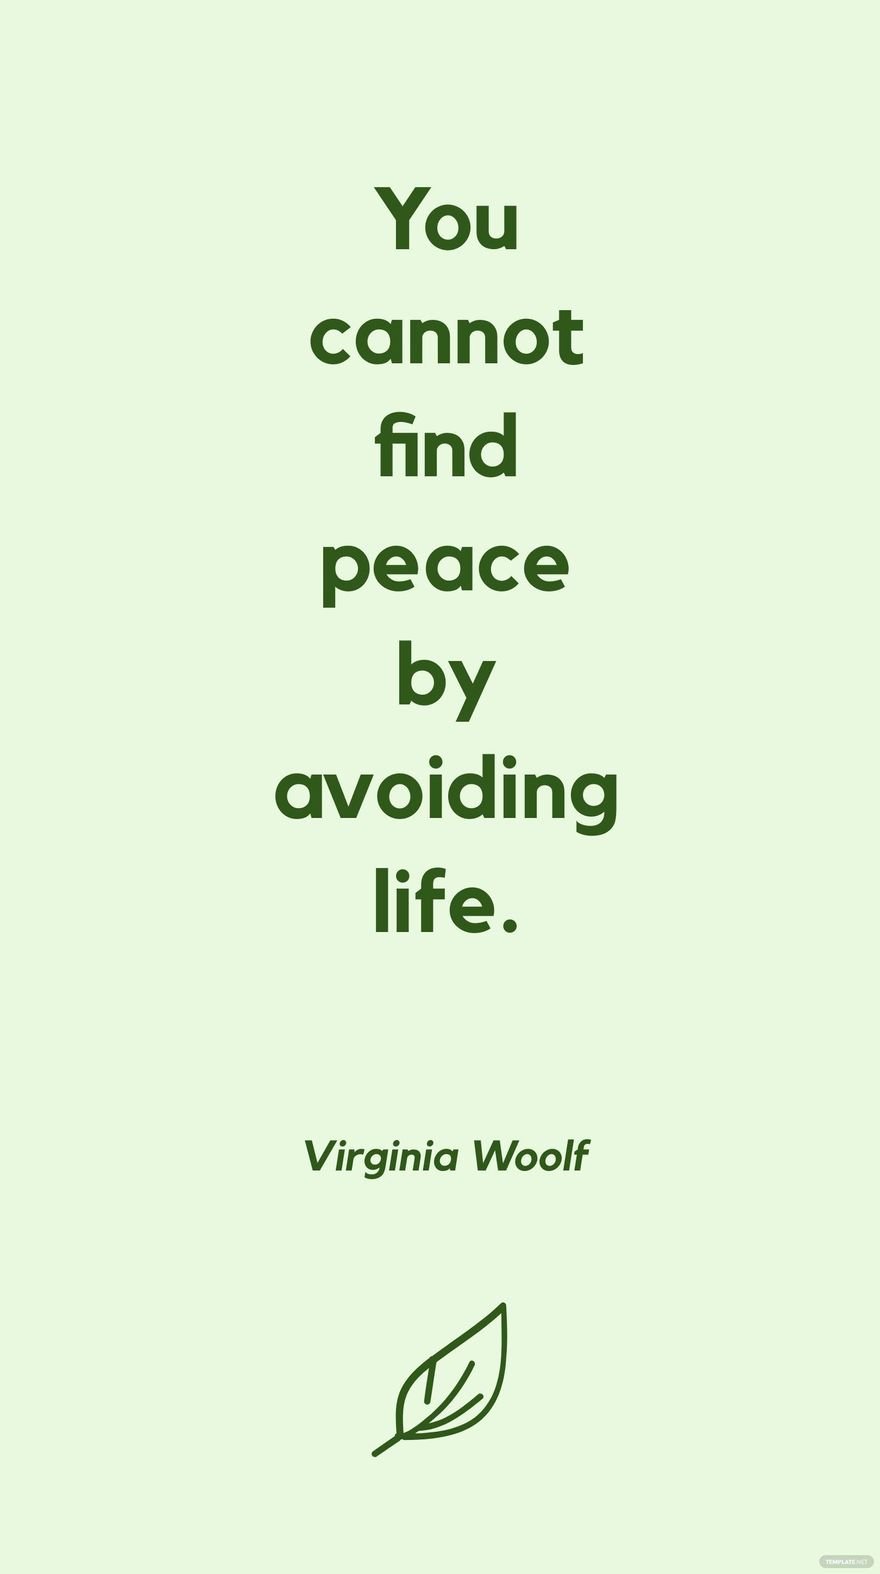 Virginia Woolf - You cannot find peace by avoiding life.